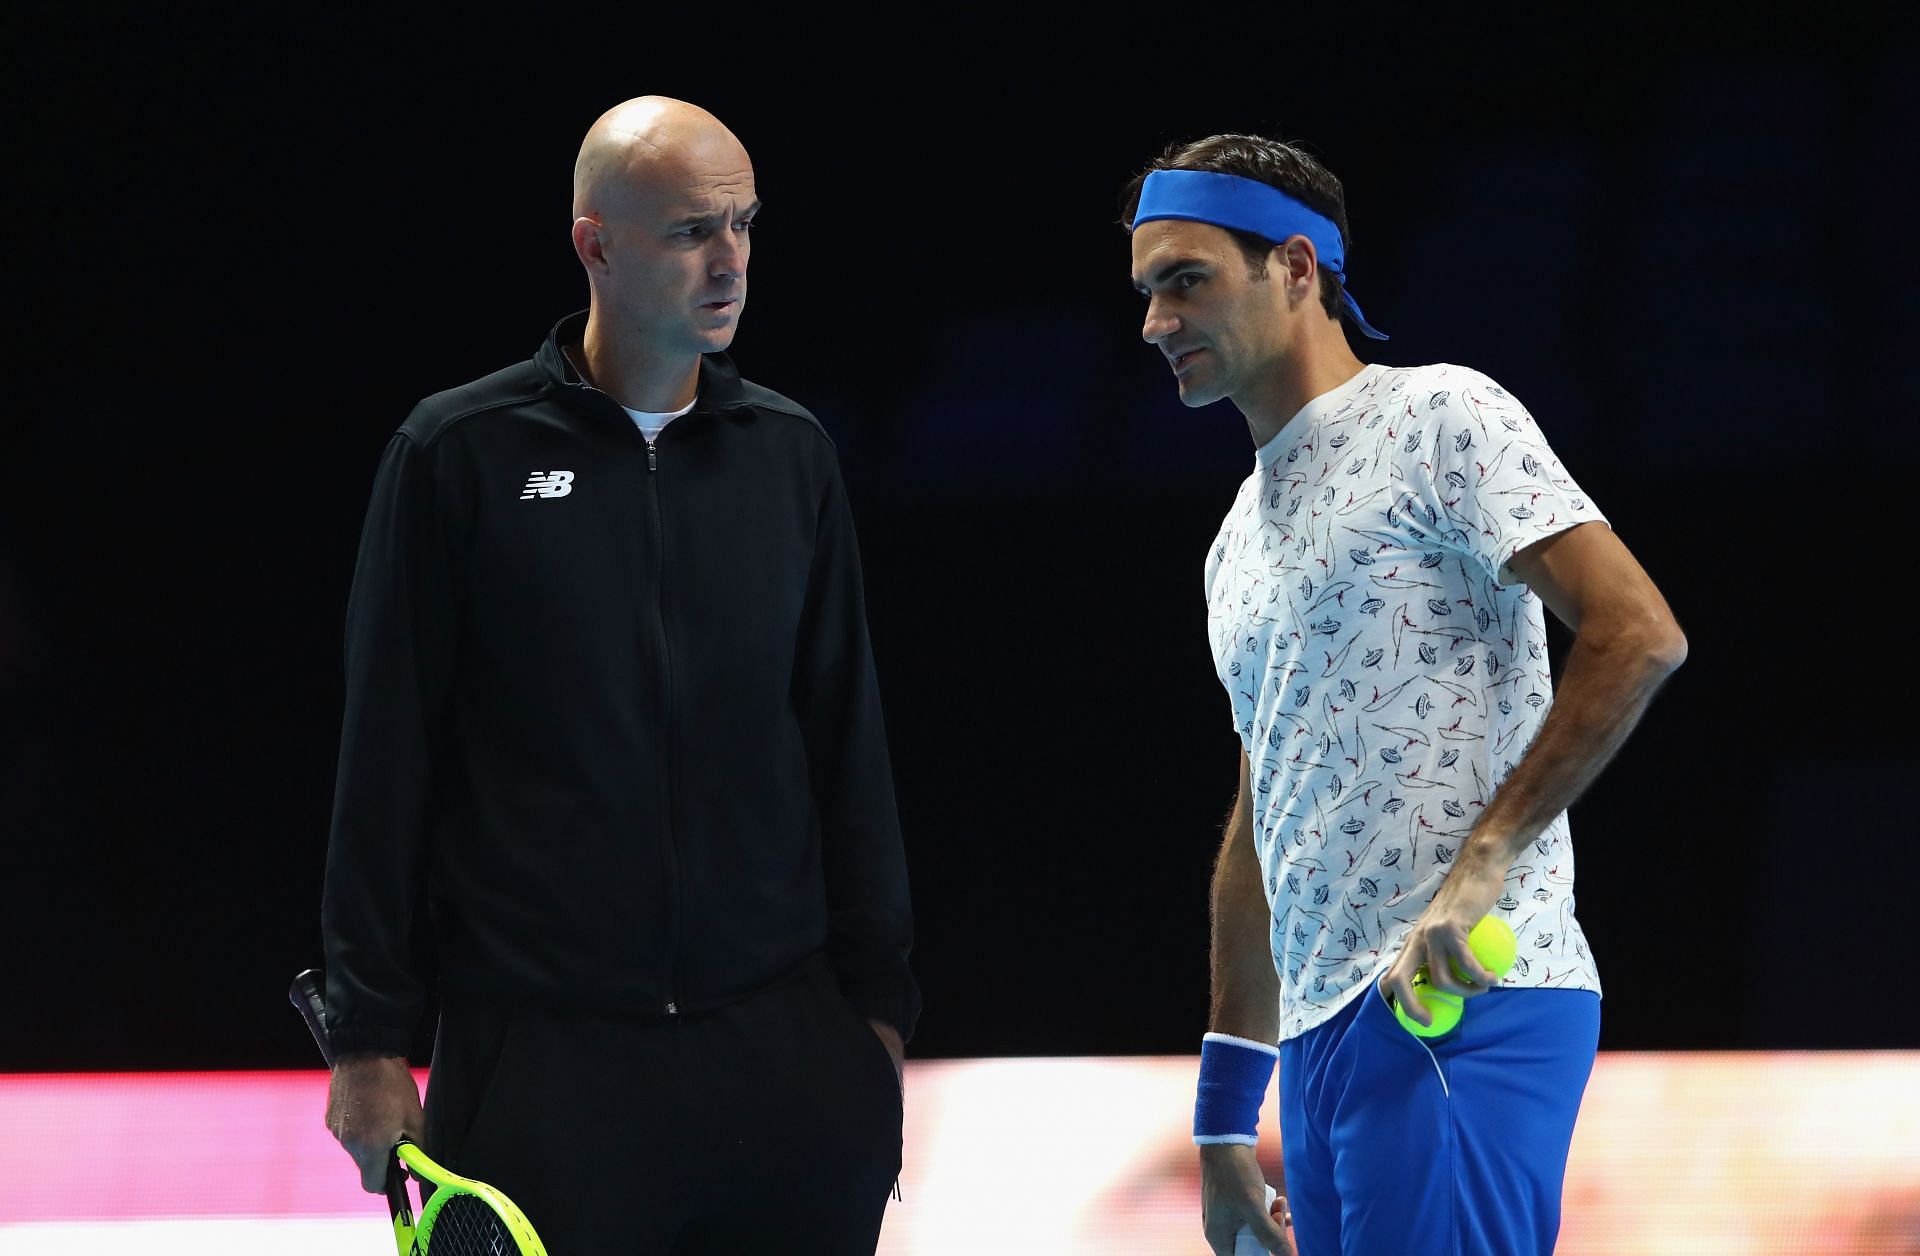 Ivan Ljubicic and Roger Federer pictured at the Nitto ATP Finals